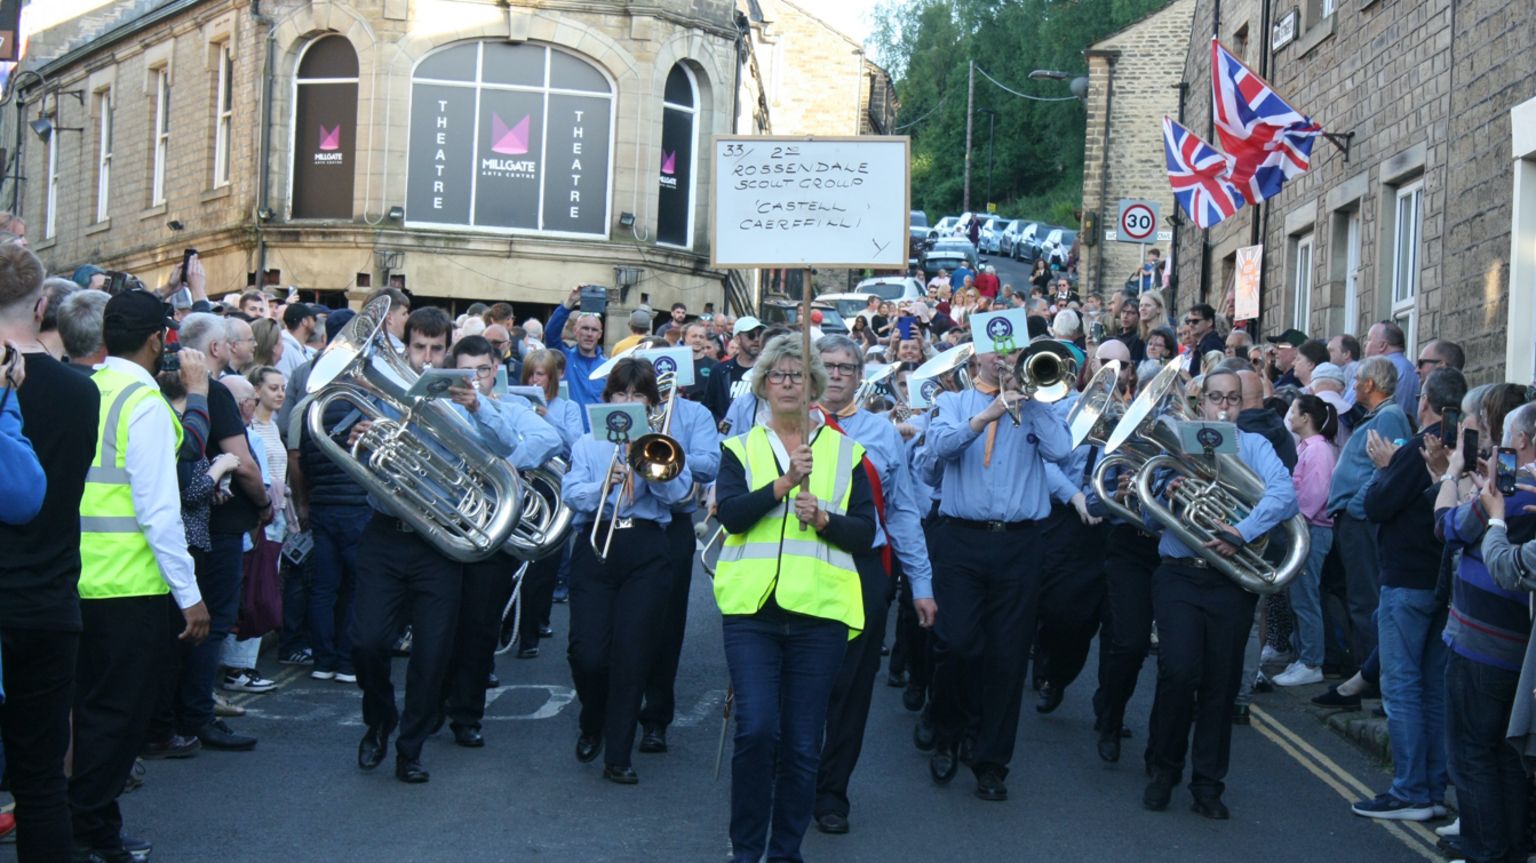 Band marching in Saddleworth